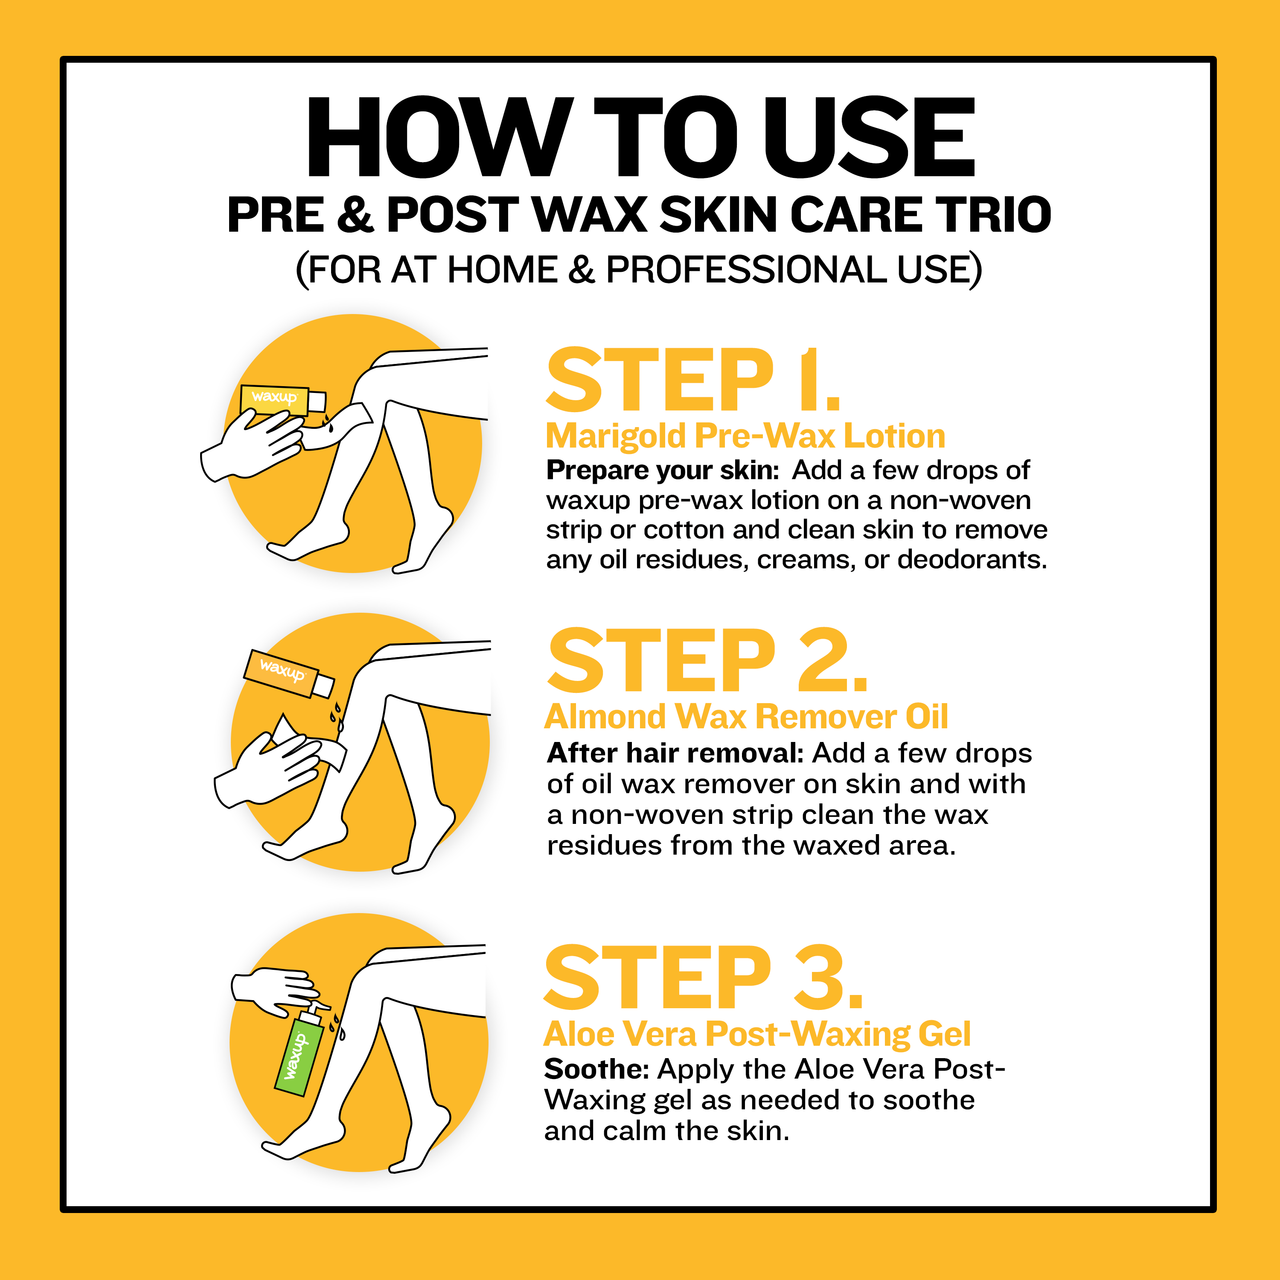 Before And After Waxing Skin Care Duo - thatswaxup -  - Pre and Post Waxing Skin Care - waxup hair removal wax body waxing kit women and men professional waxing supplies